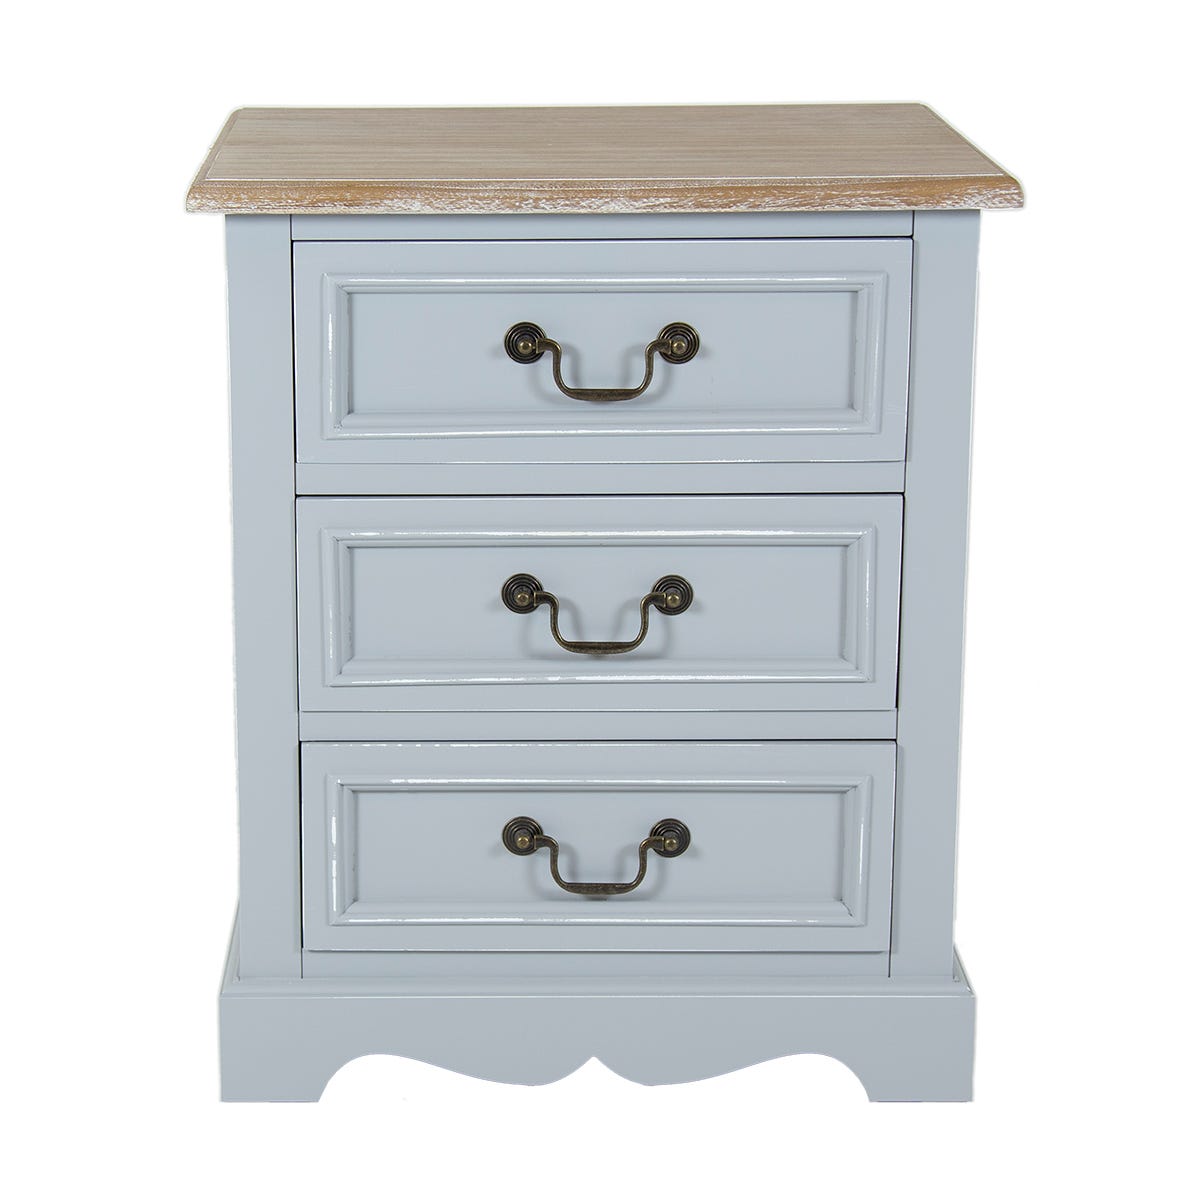 Charles Bentley Loxley 3 Drawer Bedside Table Grey